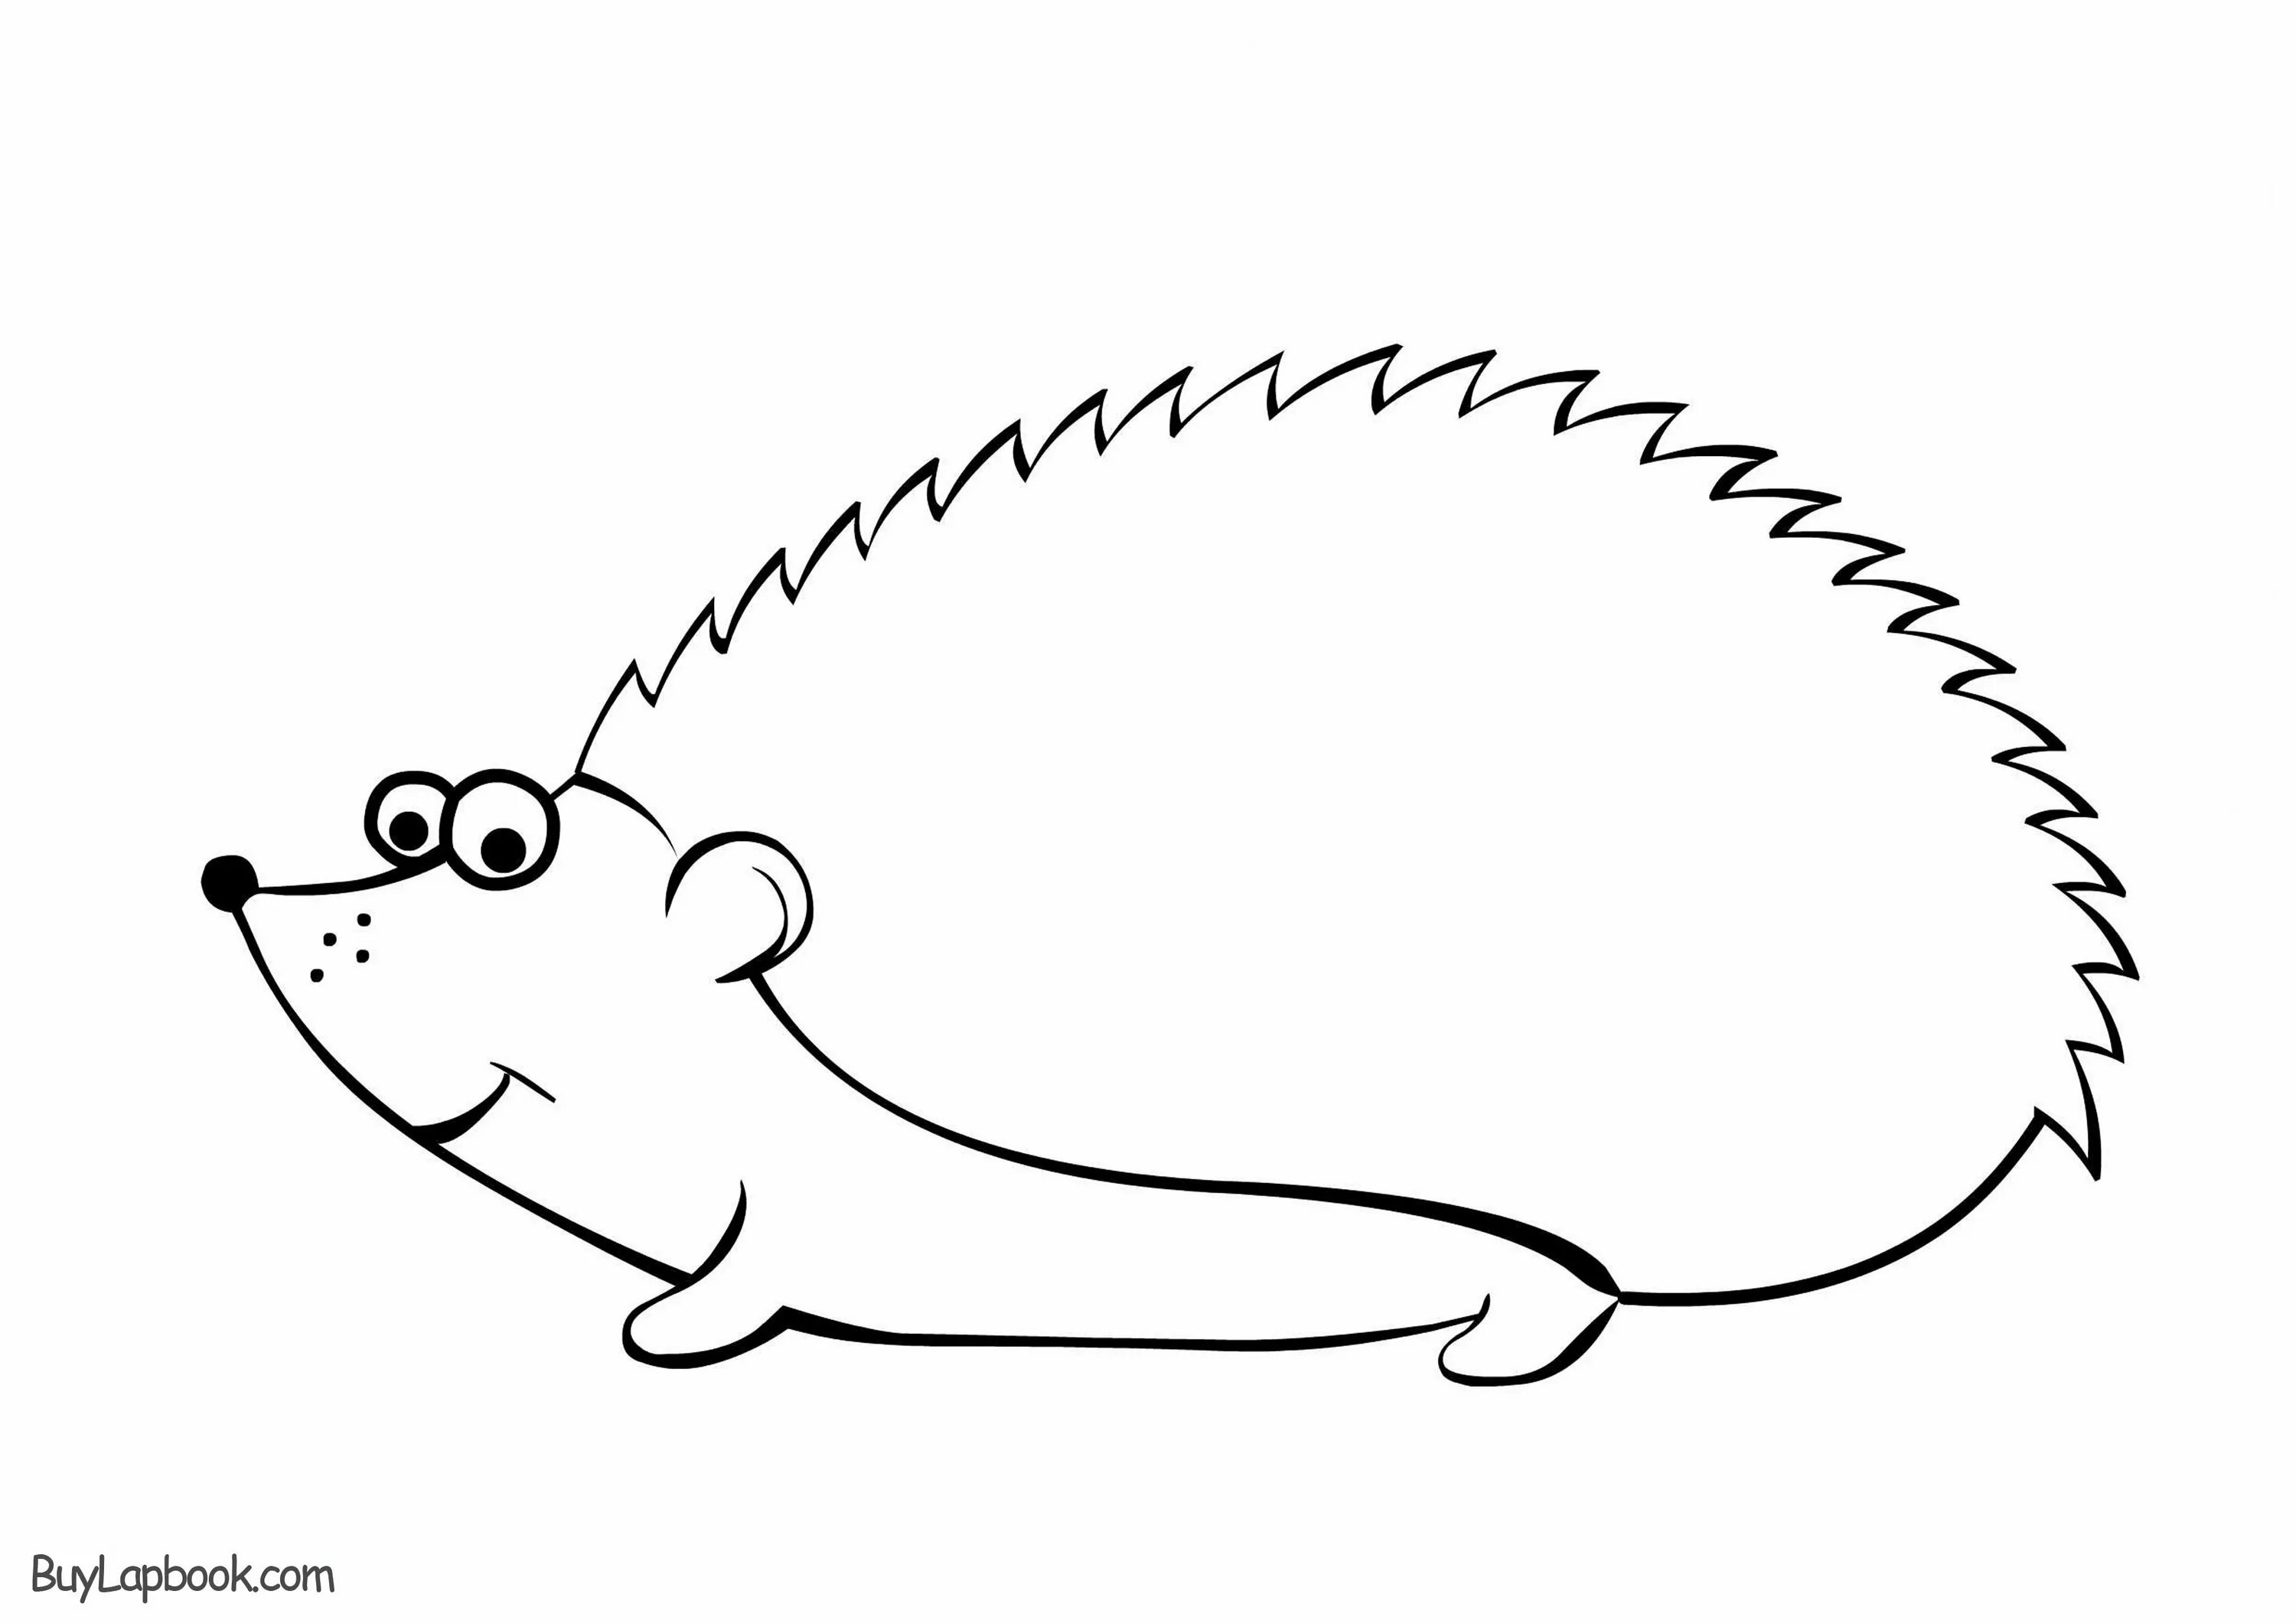 Hedgehog without spines #4